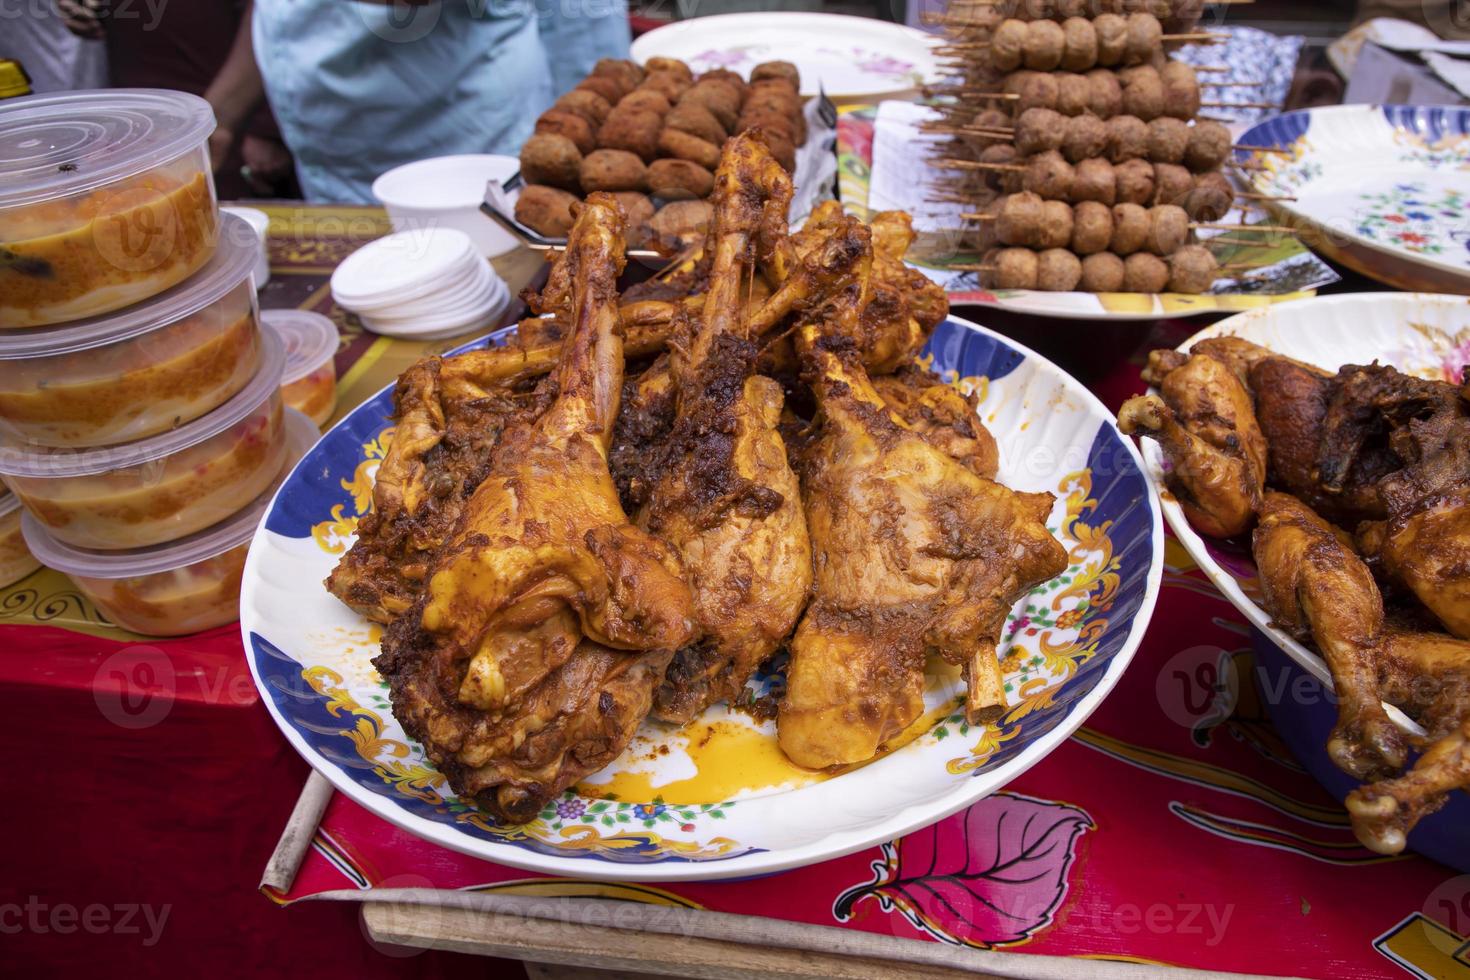 Roasted leg pieces of mutton at a street food market in Dhaka, Bangladesh photo